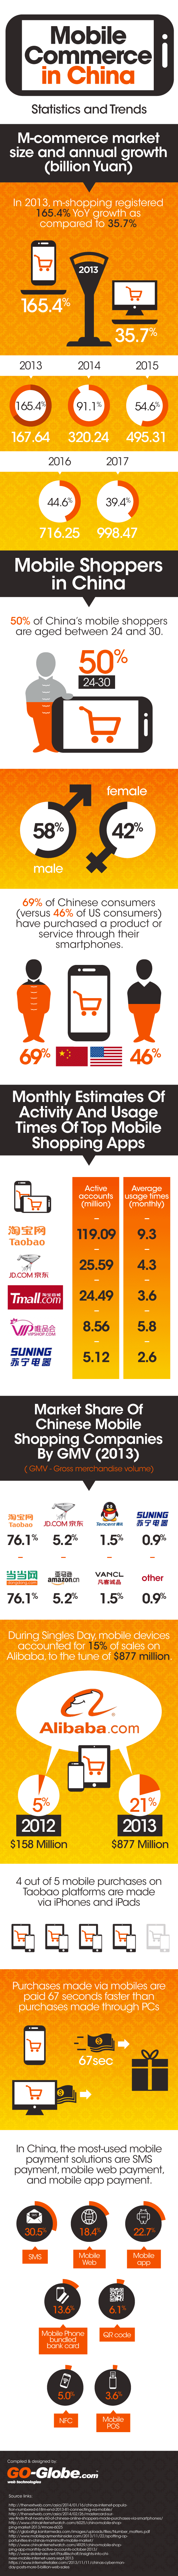 Mobile Commerce in China  Infographic